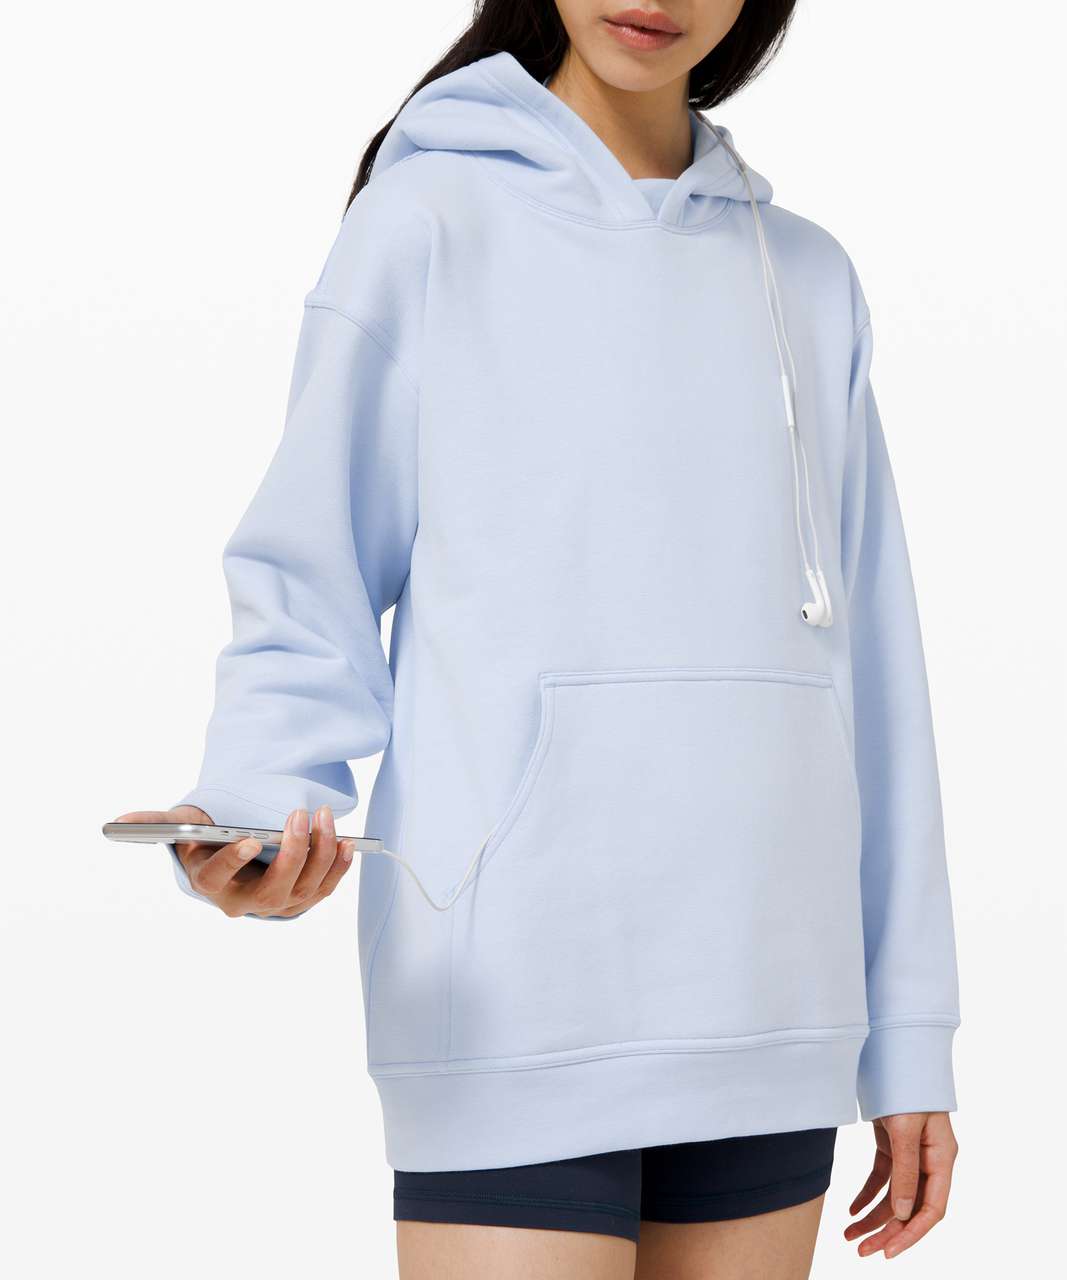 Lululemon All Yours Hoodie - Daydream